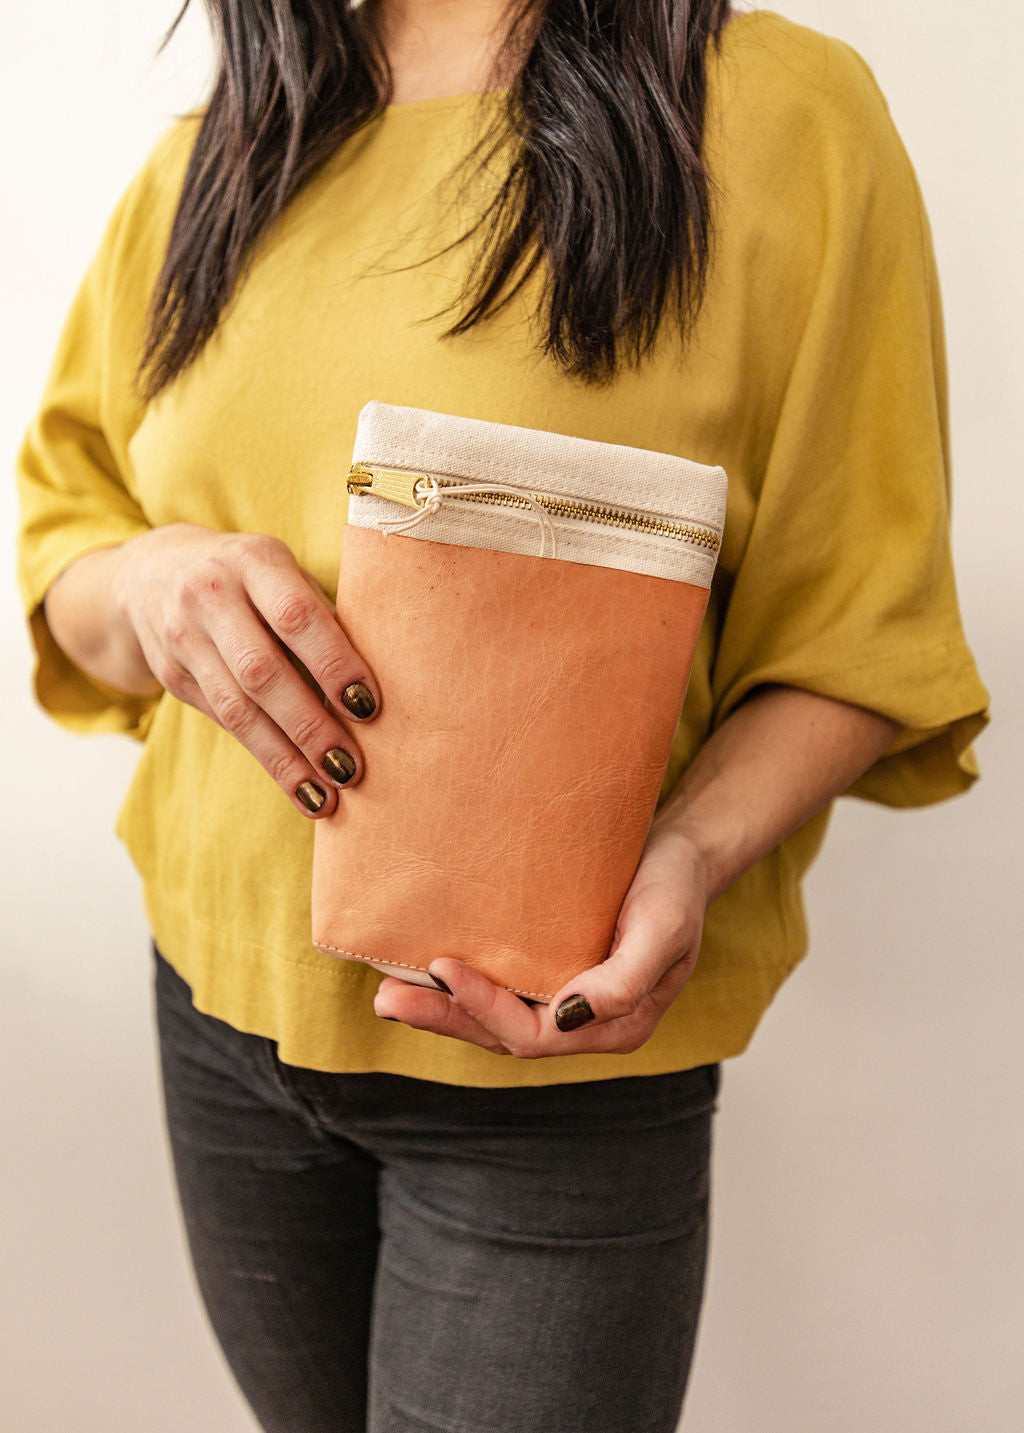 Small Hardware Pouch - Natural